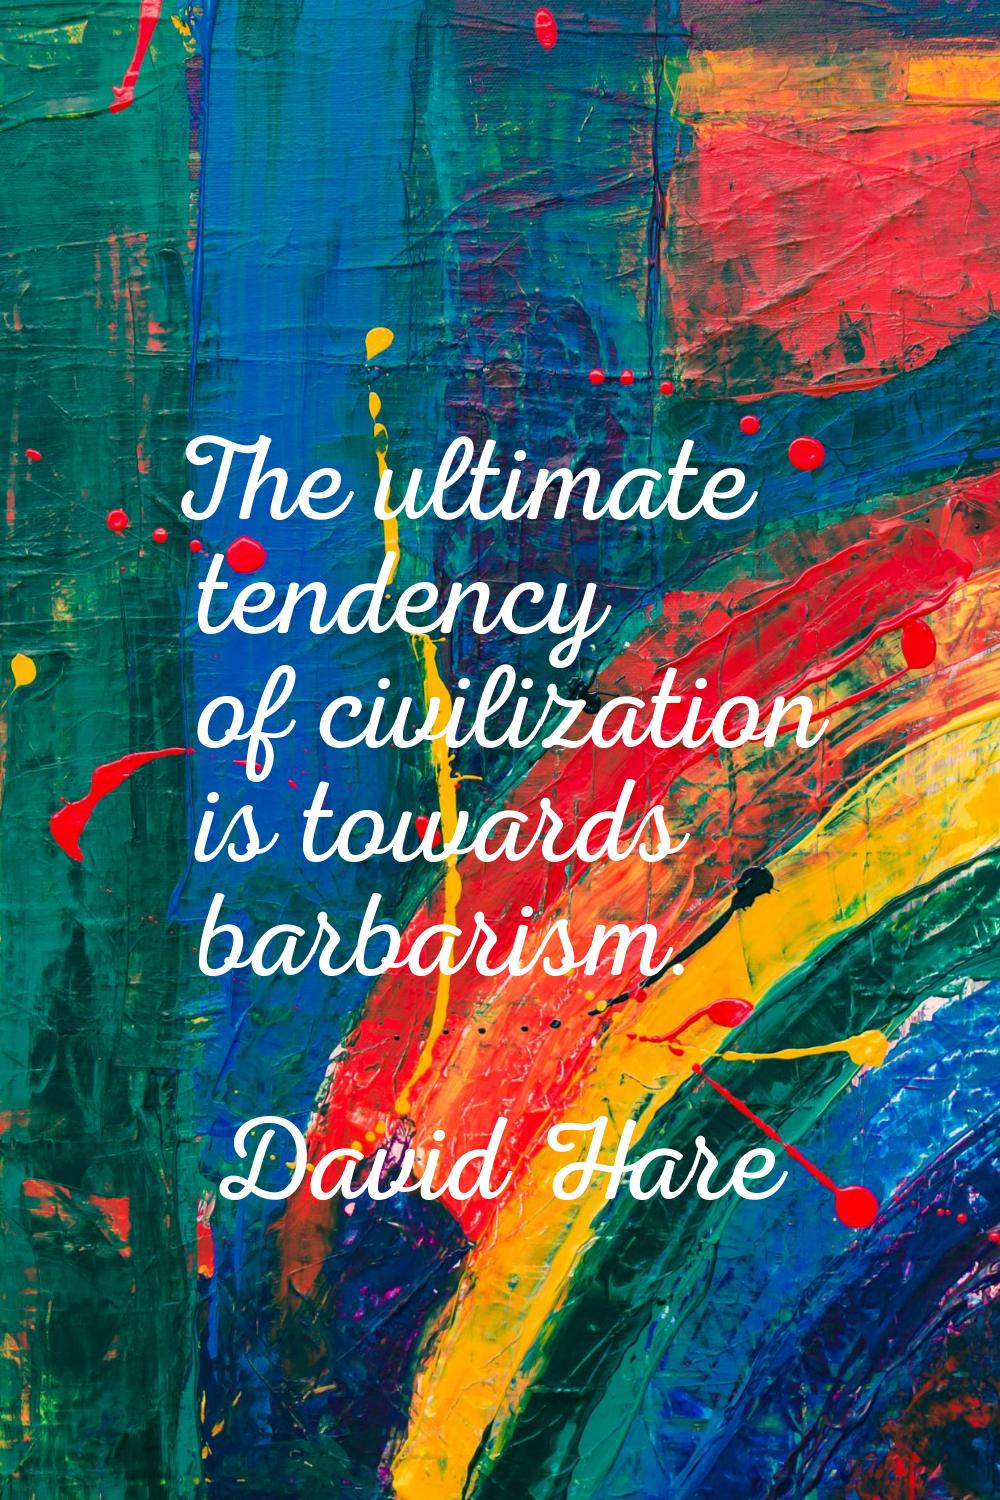 The ultimate tendency of civilization is towards barbarism.